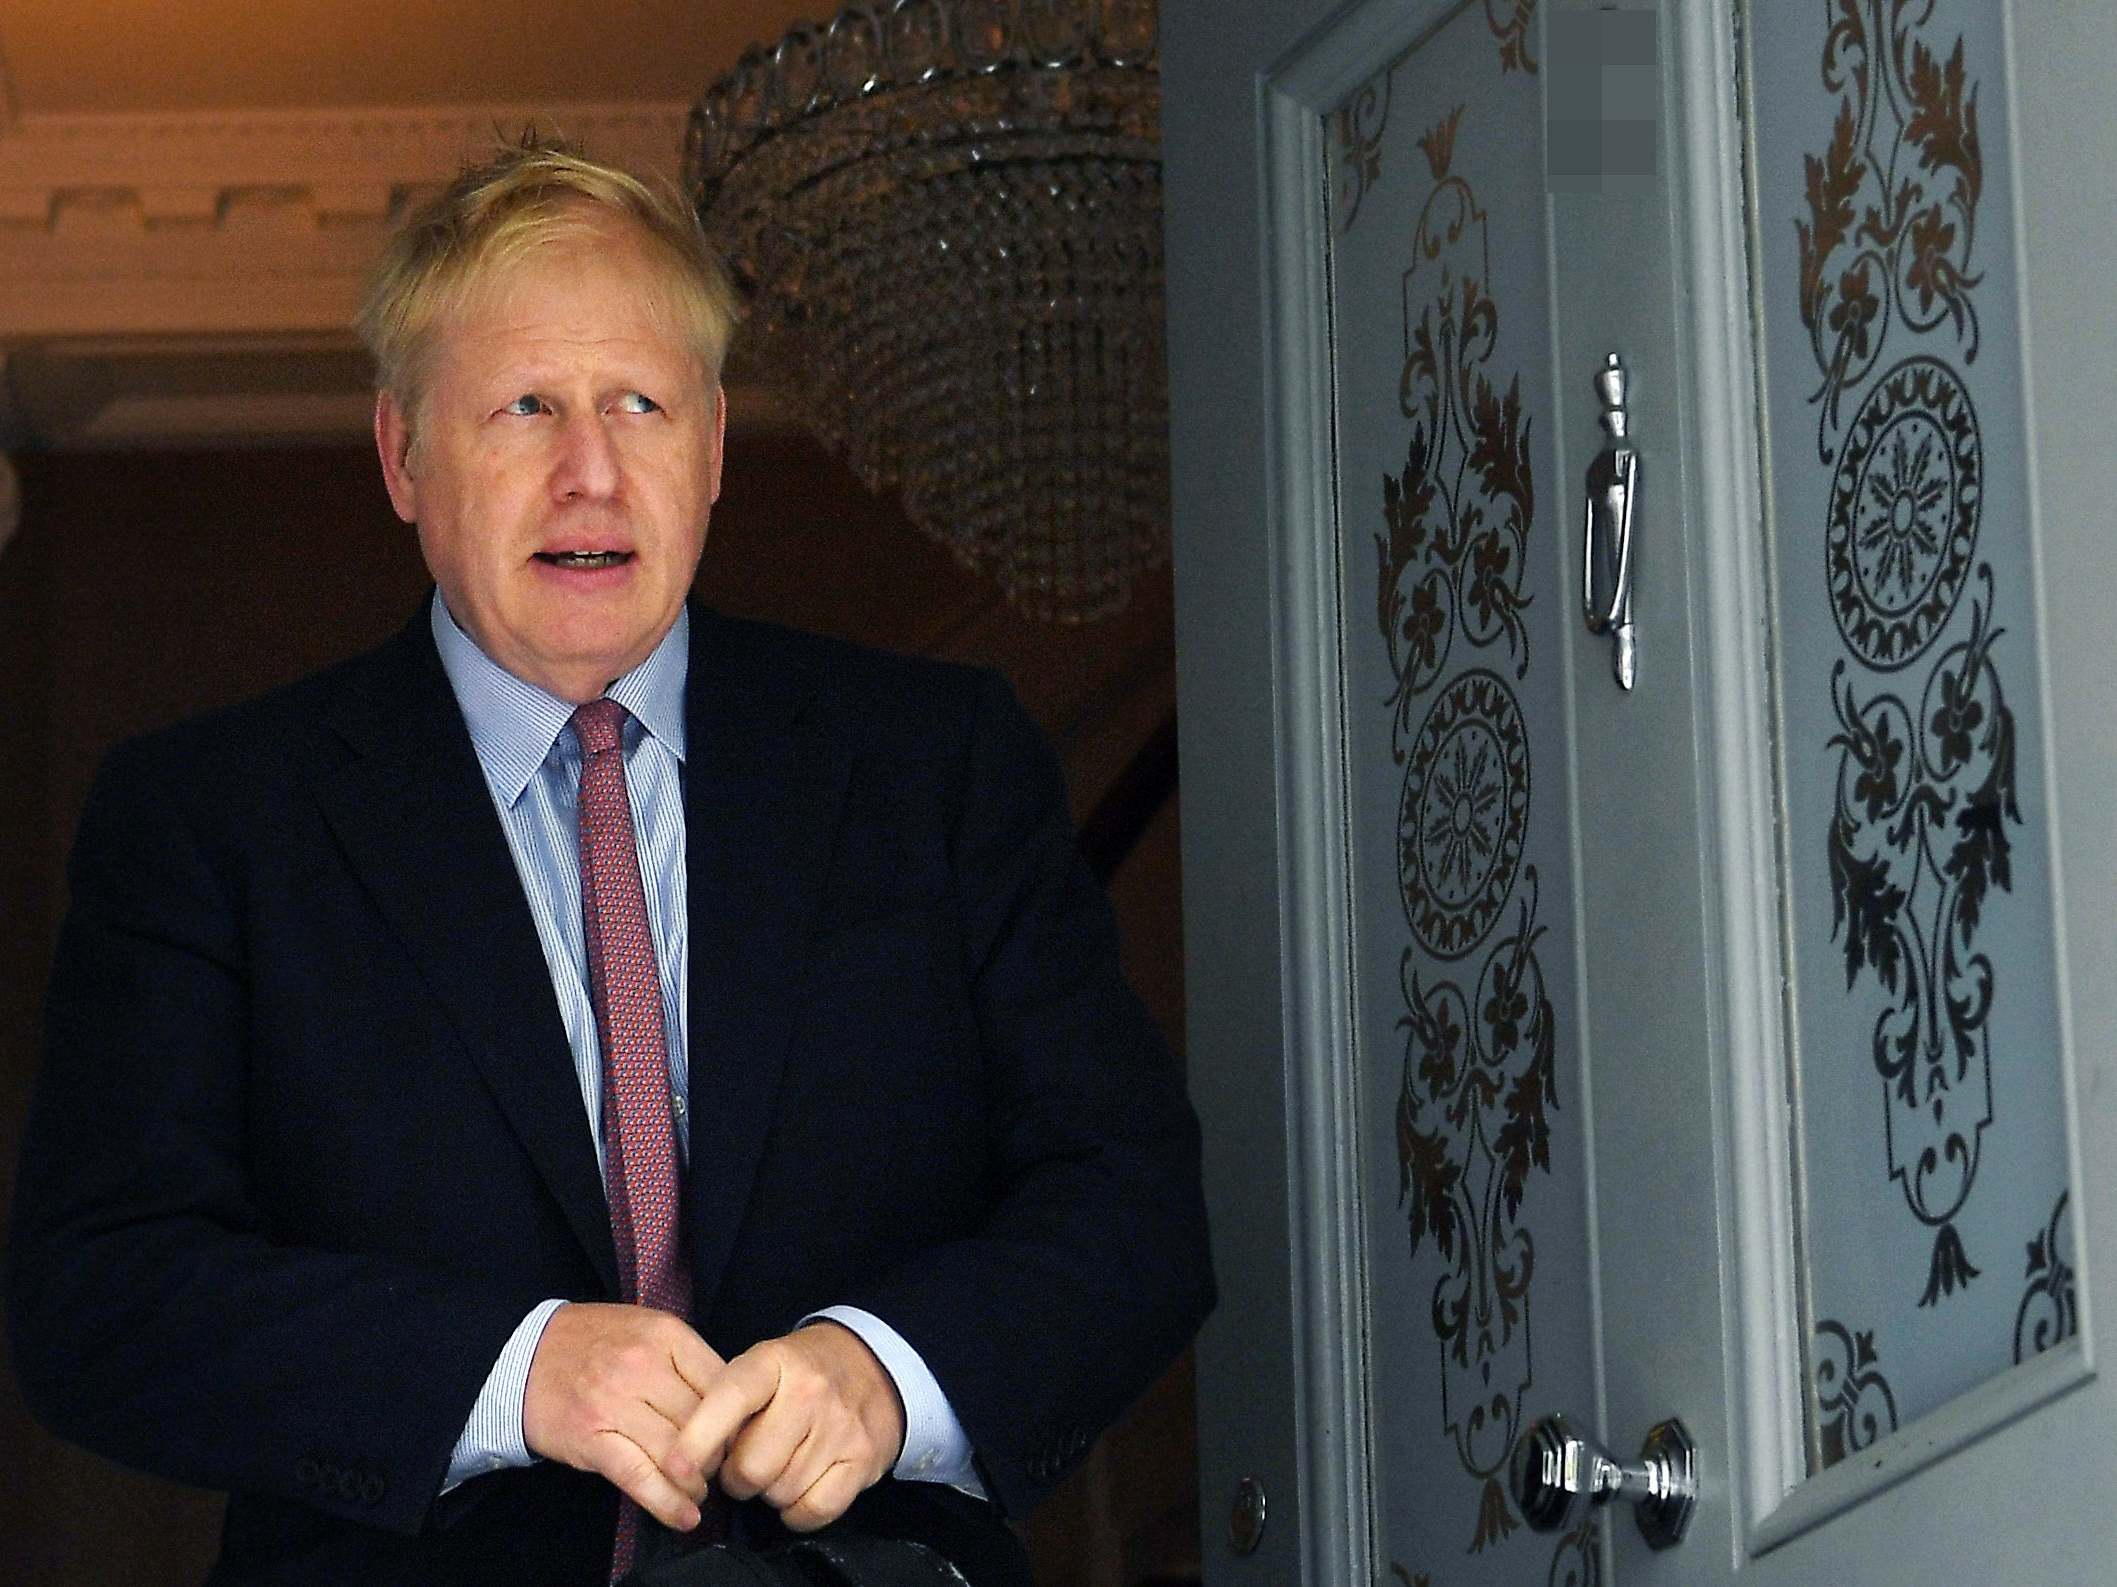 Sorry Boris, but freedom of speech does not mean you can say whatever you like